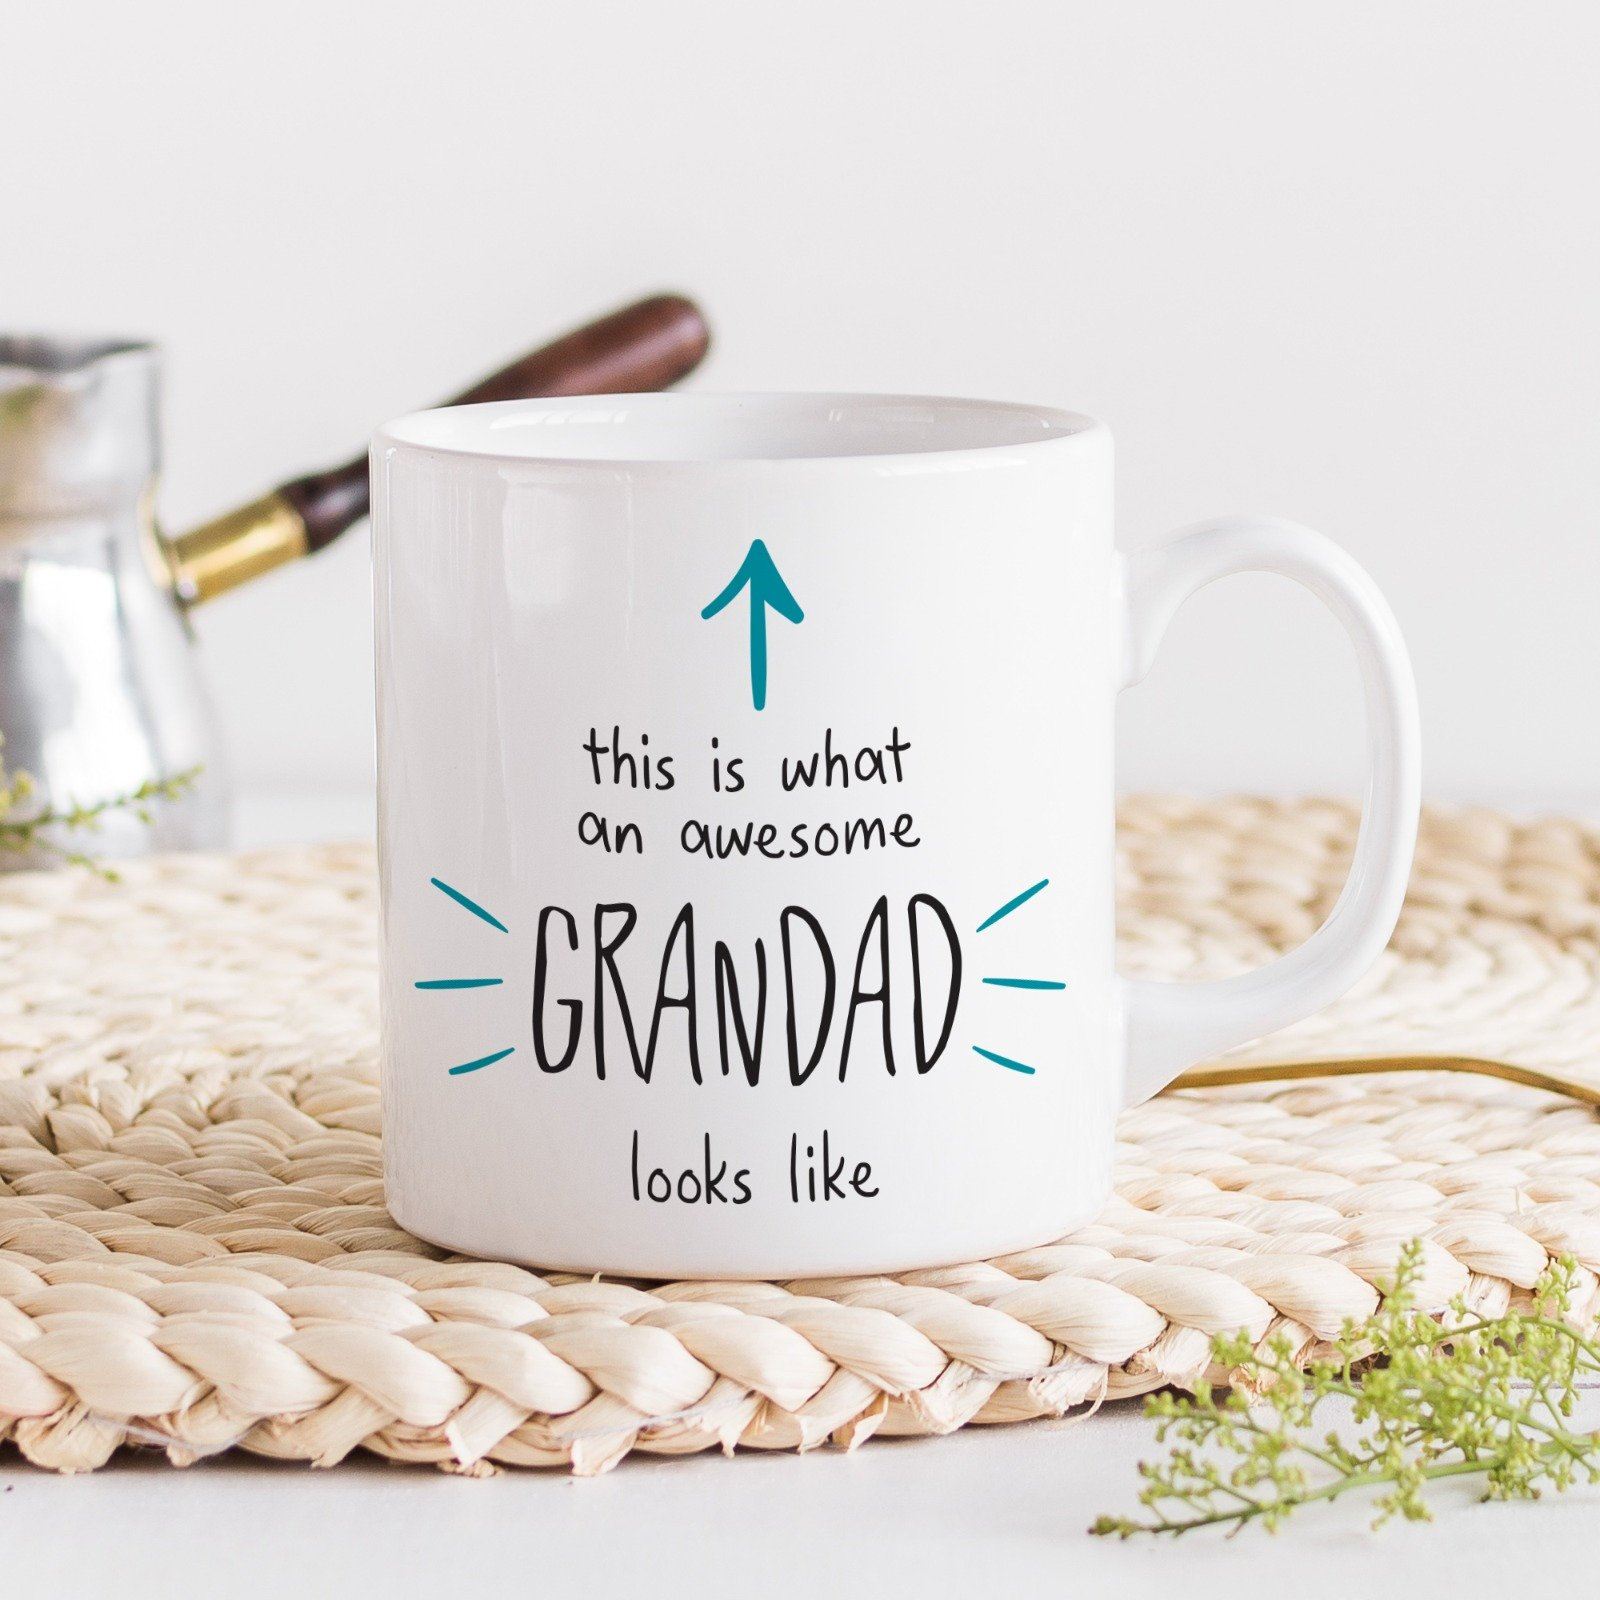 This Is What An Awesome Grandad Looks Like Mug, Father's Day Gift, Birthday Gift For Grandpa